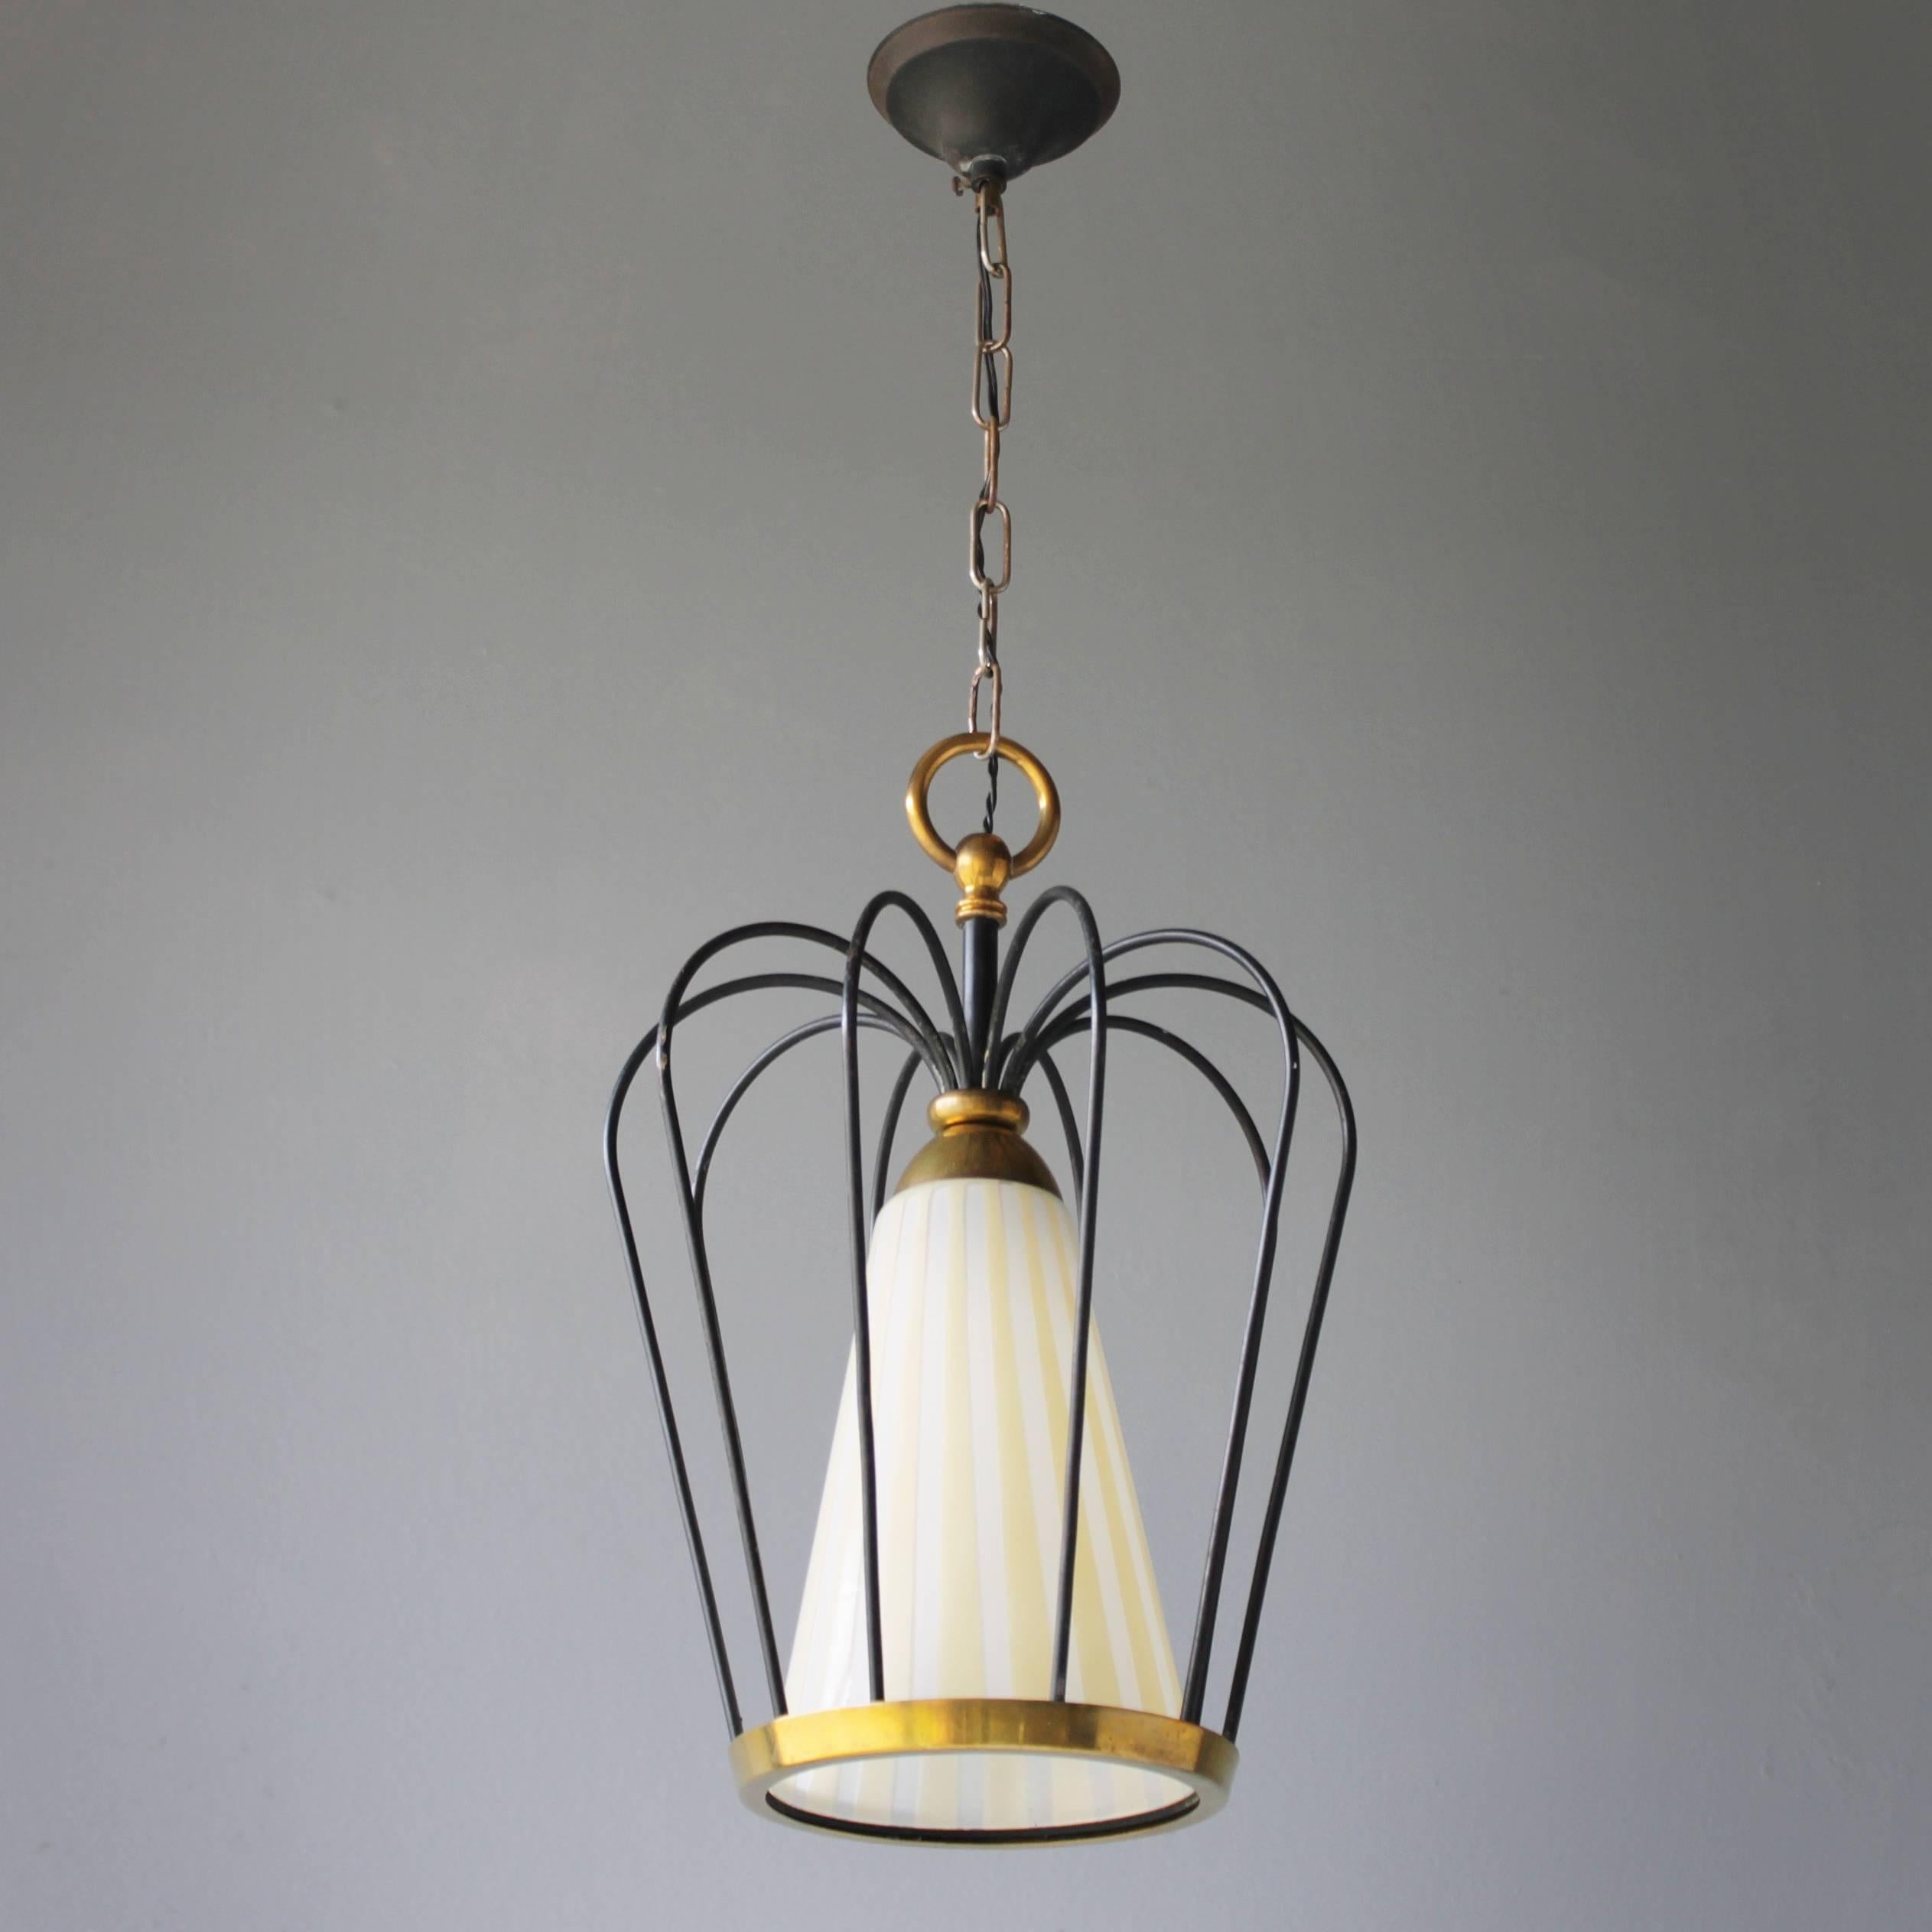 Italian pendant in the style of Stilnovo. 
One bulb E27/E26 of max 60 watt, the electricity is used but in a good condition, approved to European standards. Works in the USA.
Dimensions: From ceiling till drop: 29.1 in. (74 cm), height light: 12.6